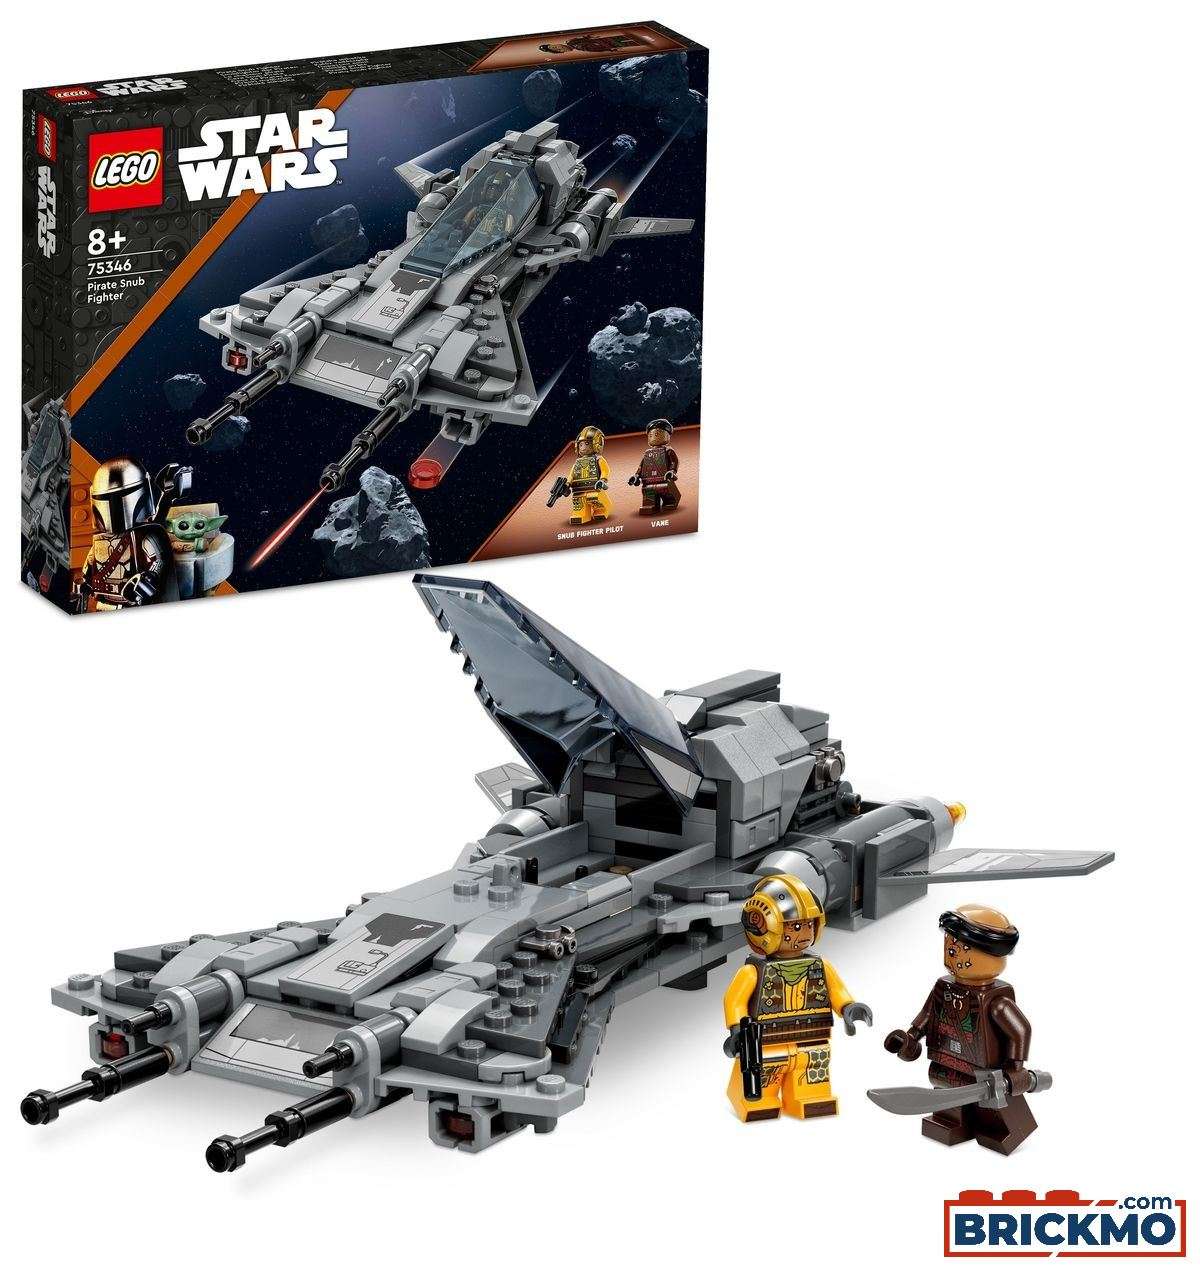 LEGO Star Wars 75346 Le chasseur pirate 75346